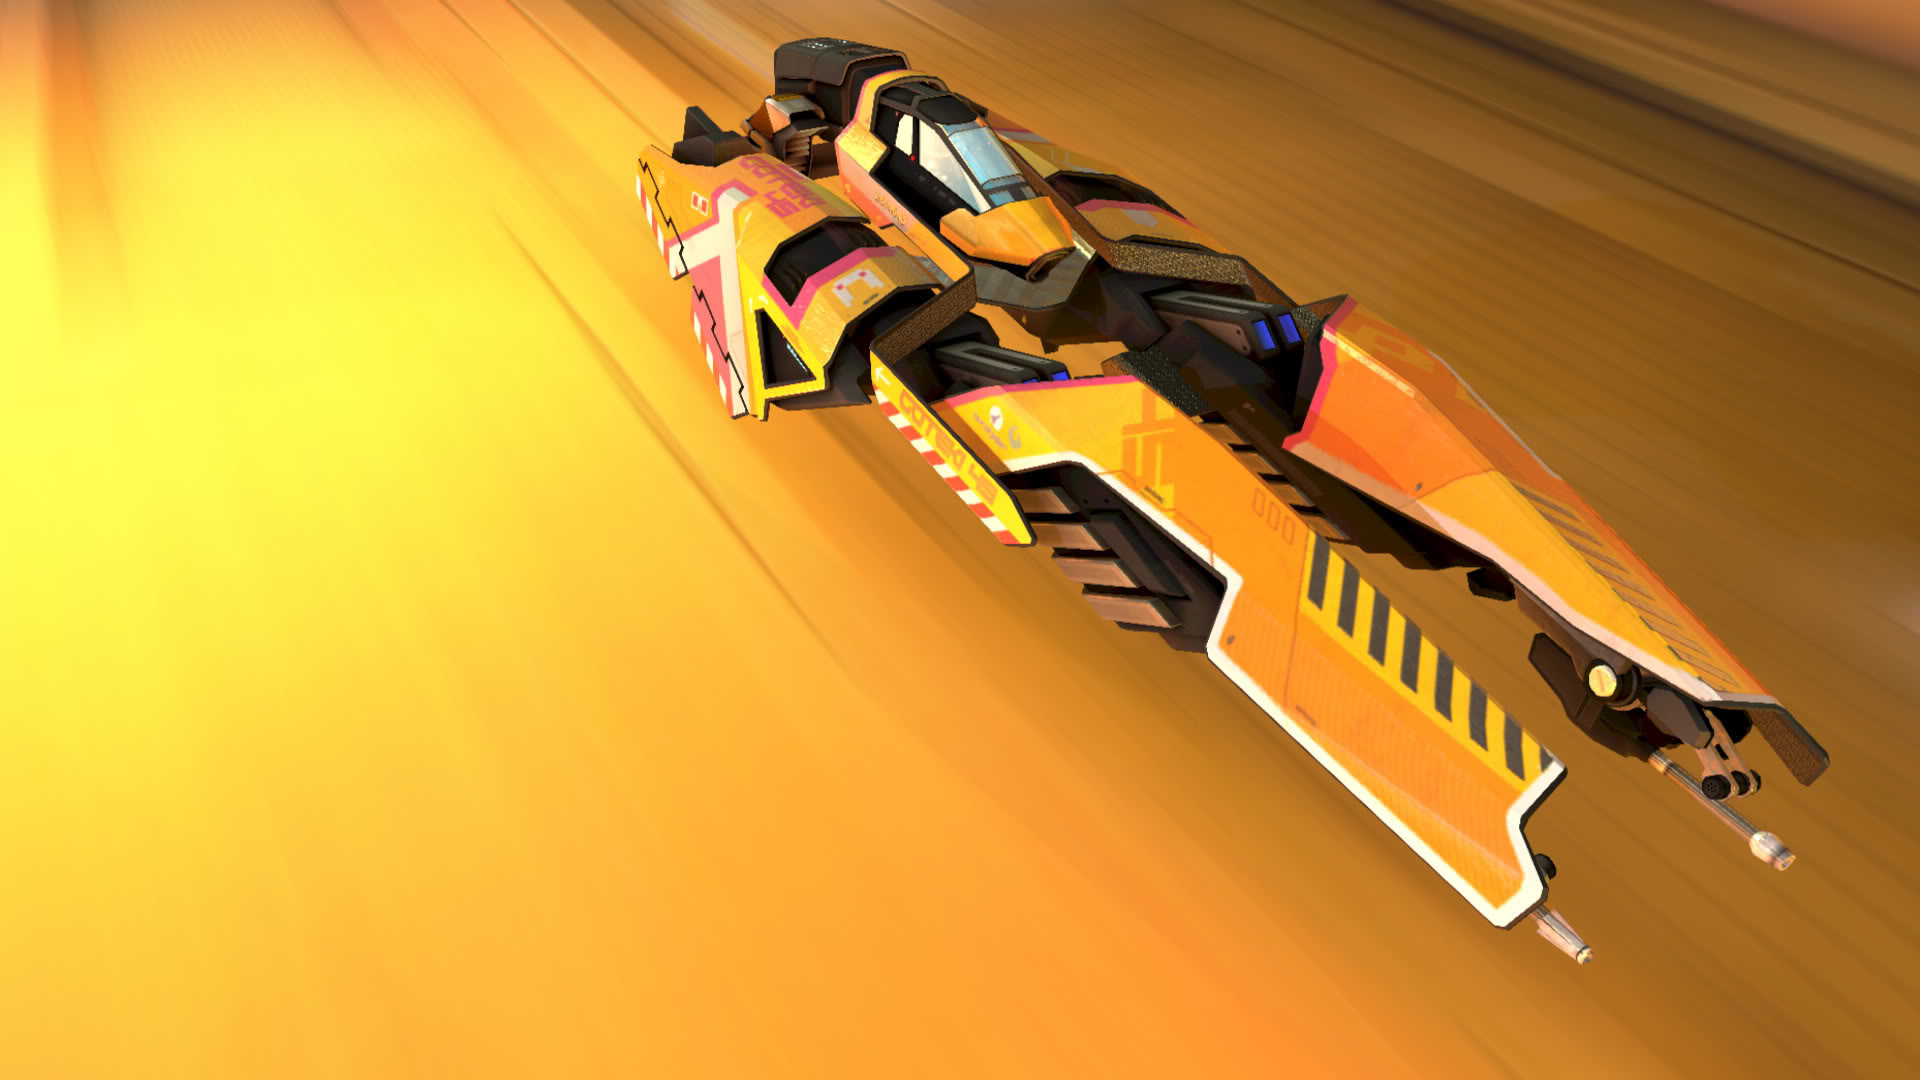 wipeout hd fury registration code